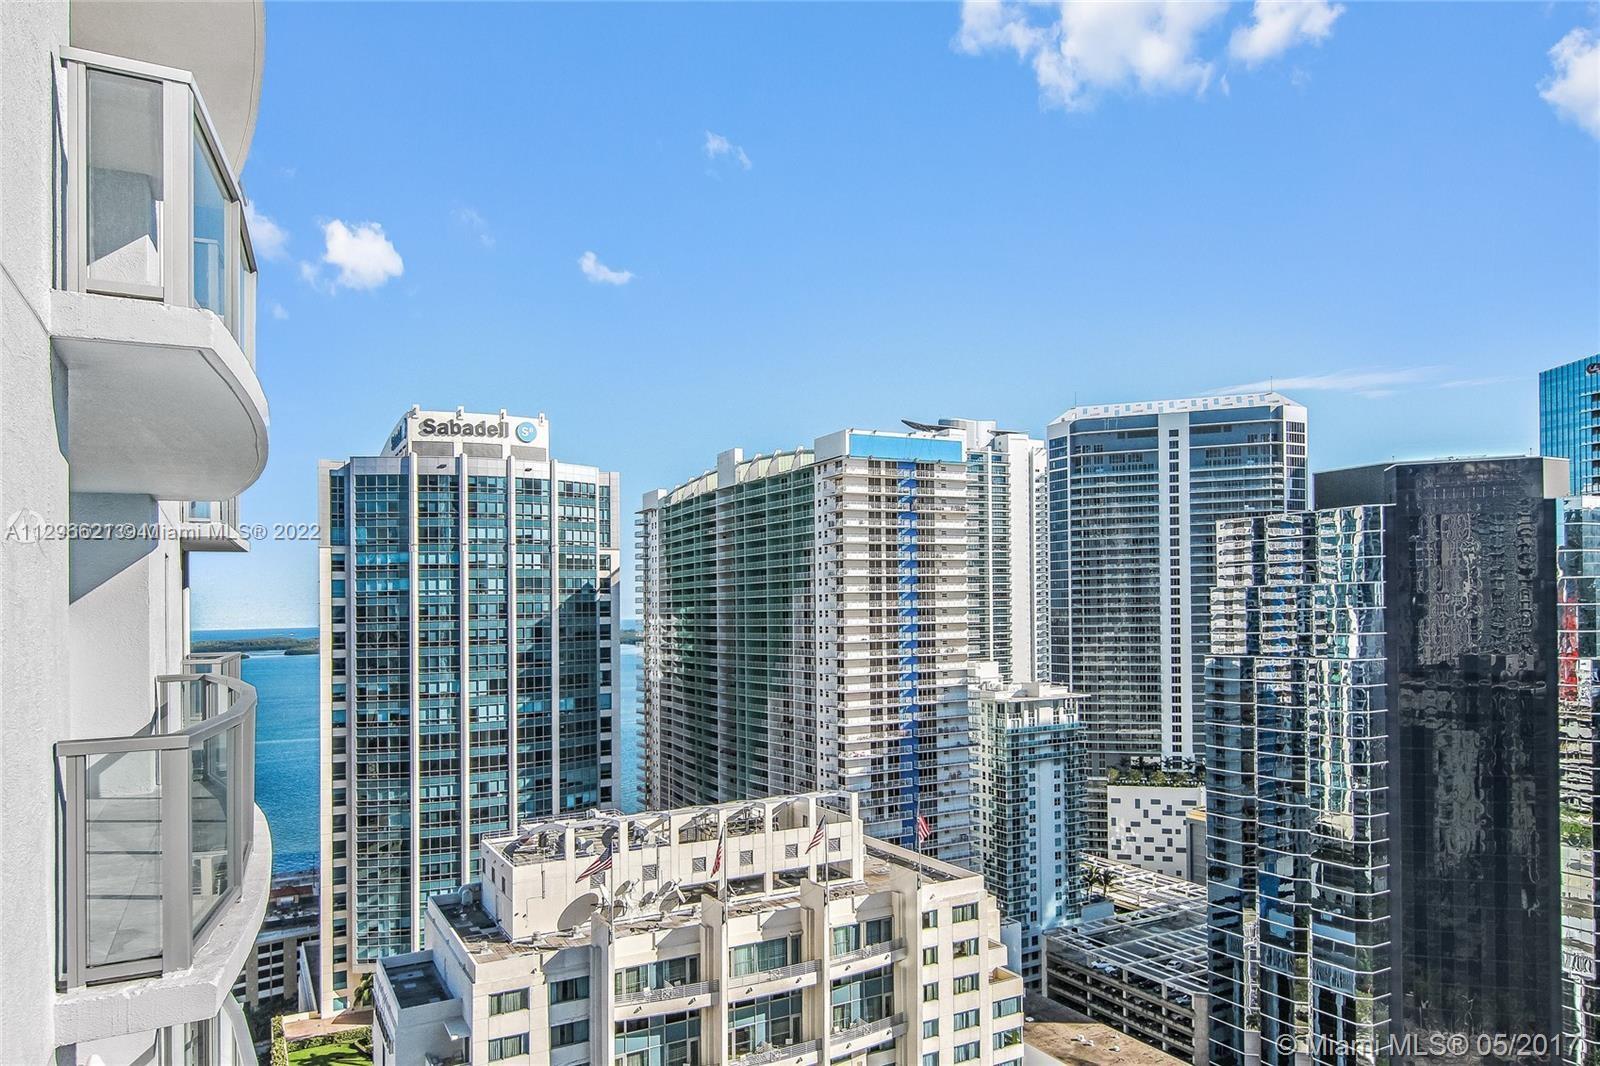 Spectacular 2 Bedroom 2 bathroom unit in the best line of the building. Italian Crystal White Flooring, enclosed glass showers, stunning views and the best location in Brickell, close to shops, restaurants and entertainment, Be part of the well known Brickell area.